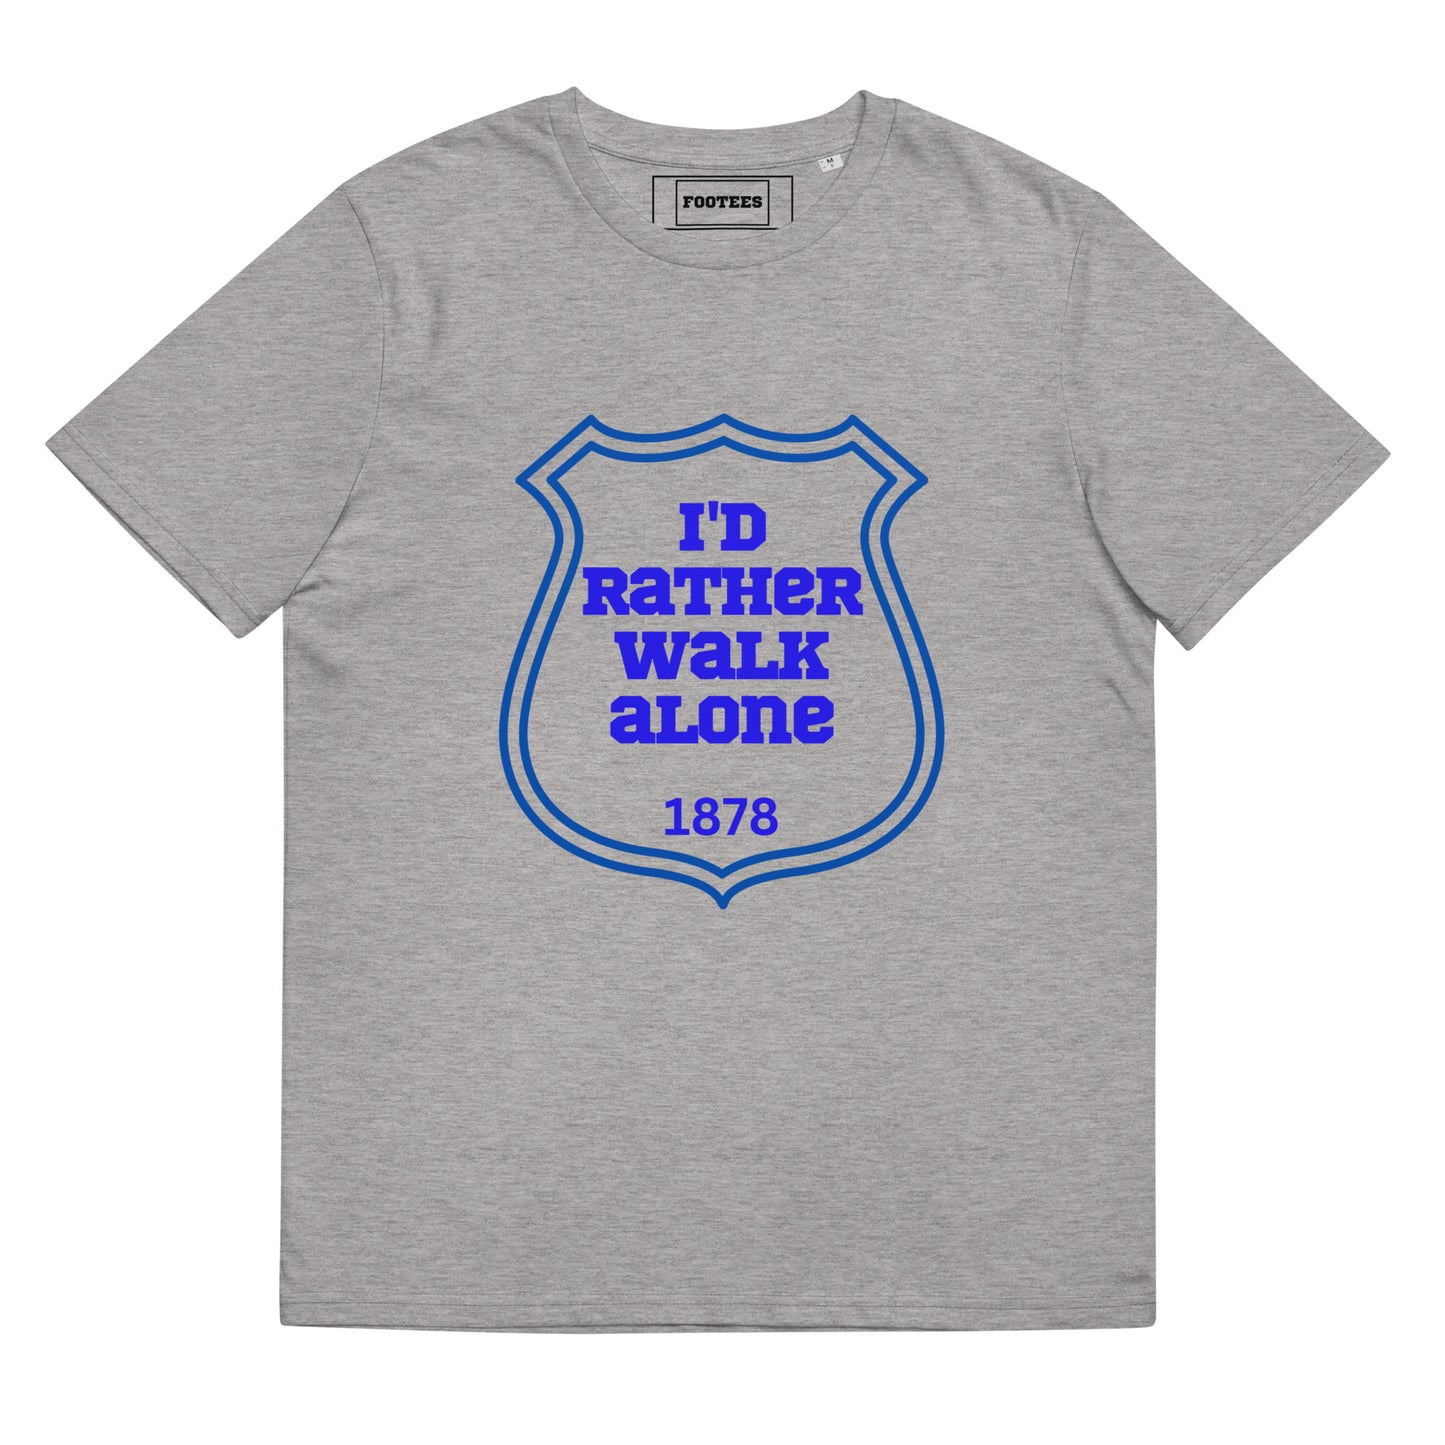 I'd rather walk alone Tee